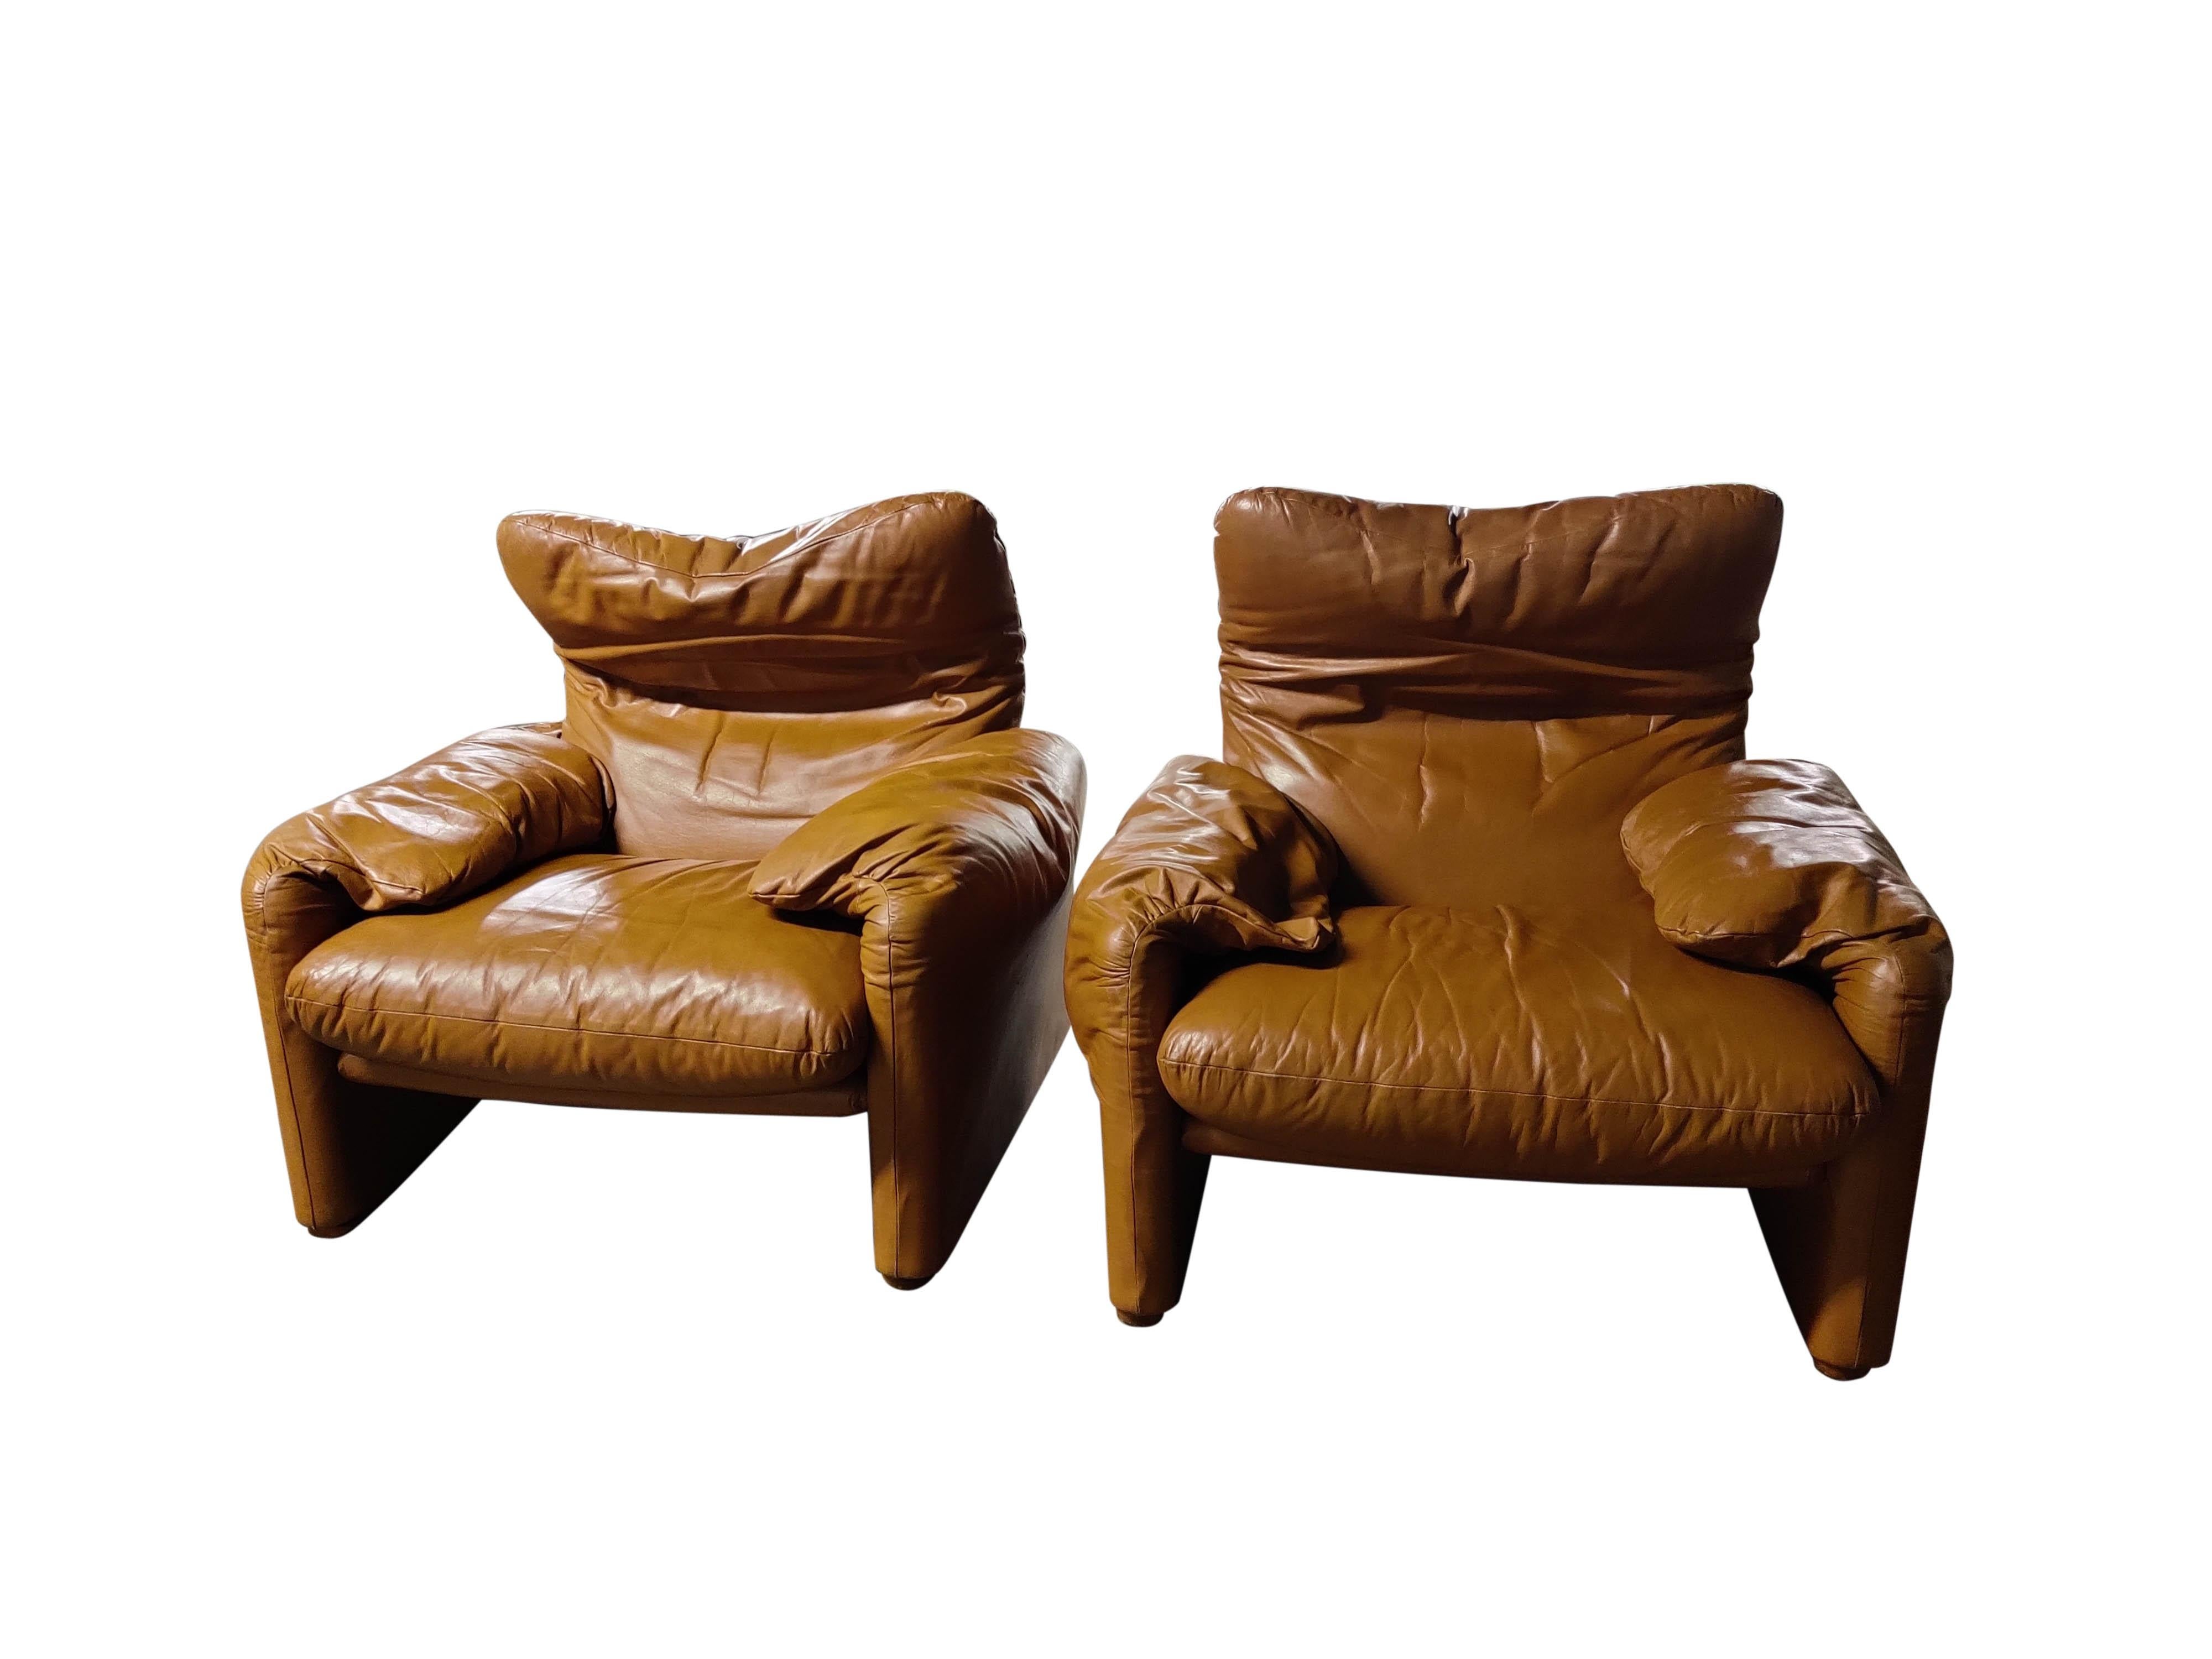 Late 20th Century Leather Maralunga Armchairs by Vico Magistretti for Cassina, 1973, Set of 2